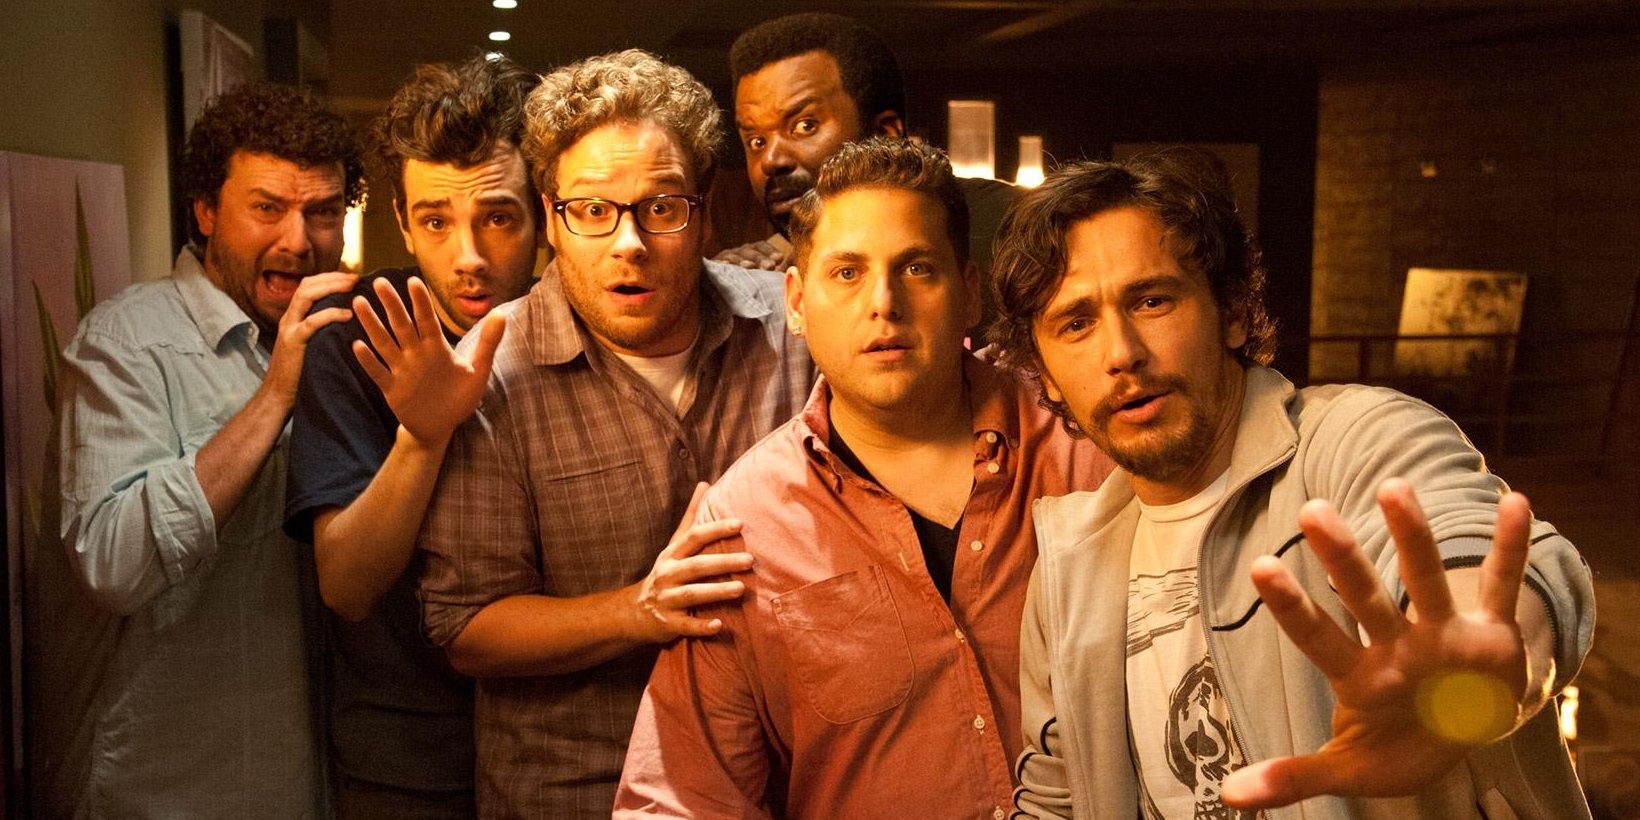 15 Best Comedy Movies To Watch If You Like The Hangover